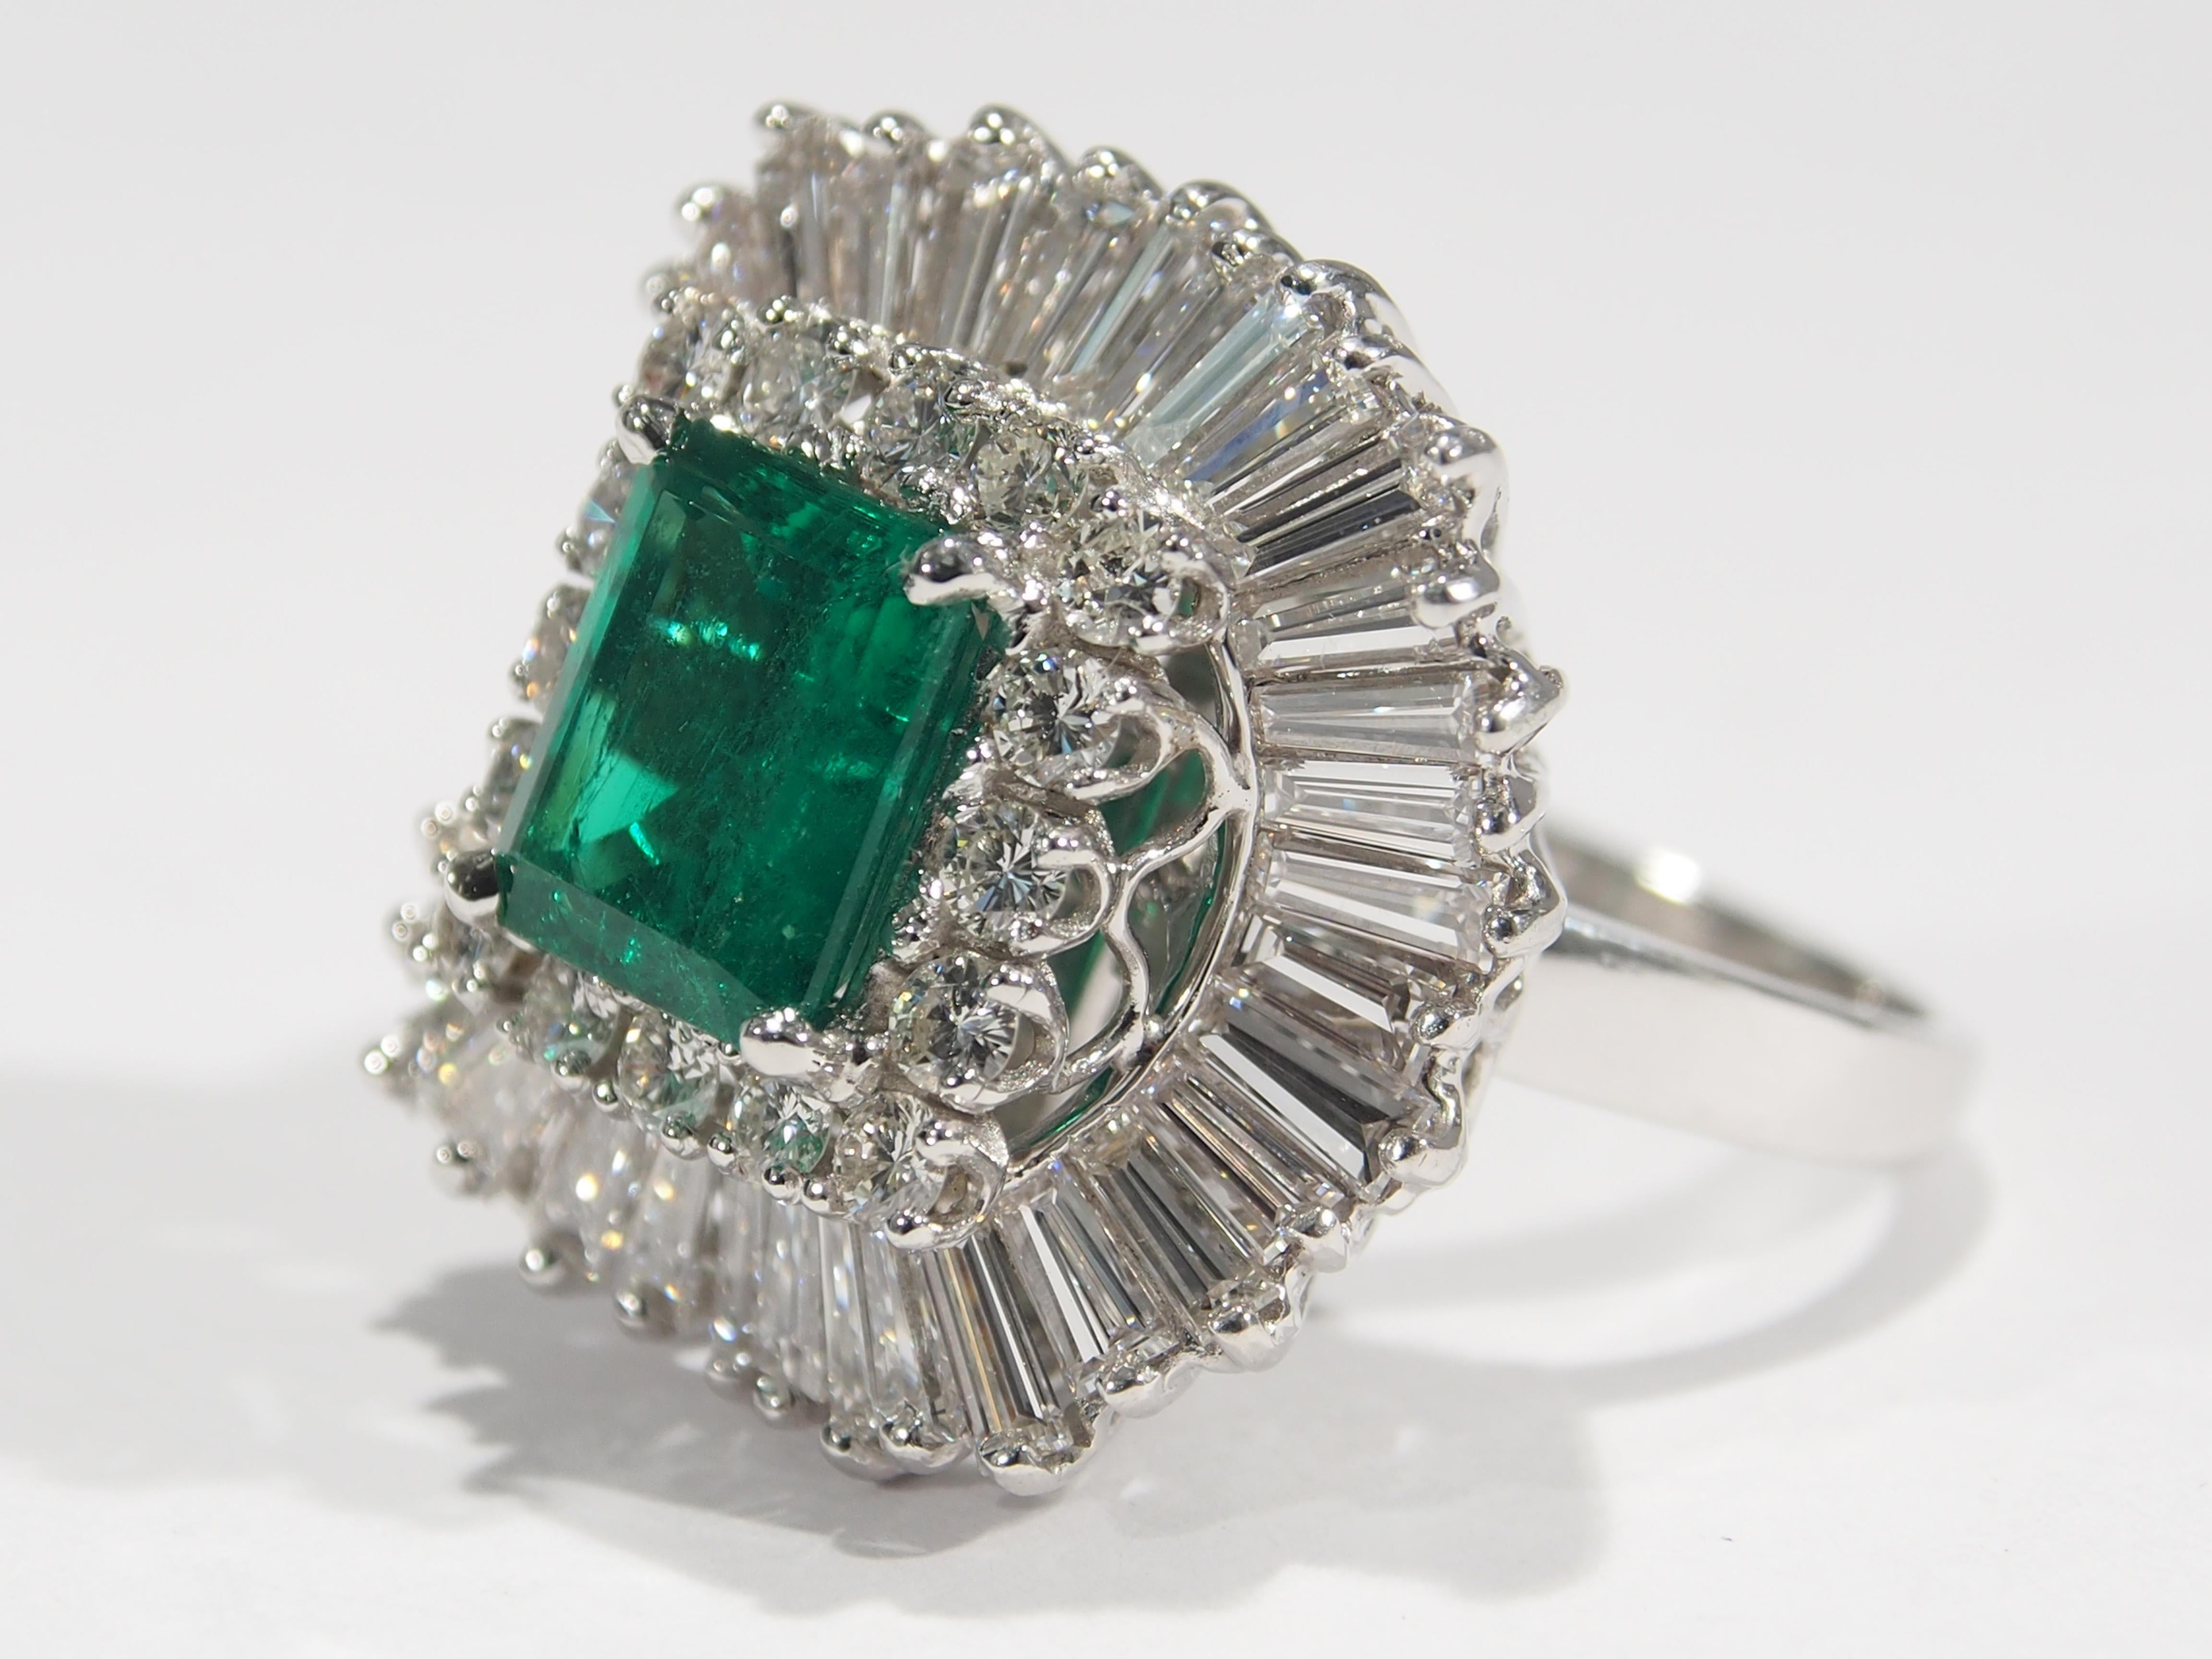 A Lovely Ballerina Ring/Pendant set with a 2.60ctw Colombian Emerald surrounded by (16) Round Brilliant Cut Diamonds and (36) Tapered Baguettes G-H in color, VS in clarity and approximately 4.30 total weight. A unique Ring set in platinum weighing